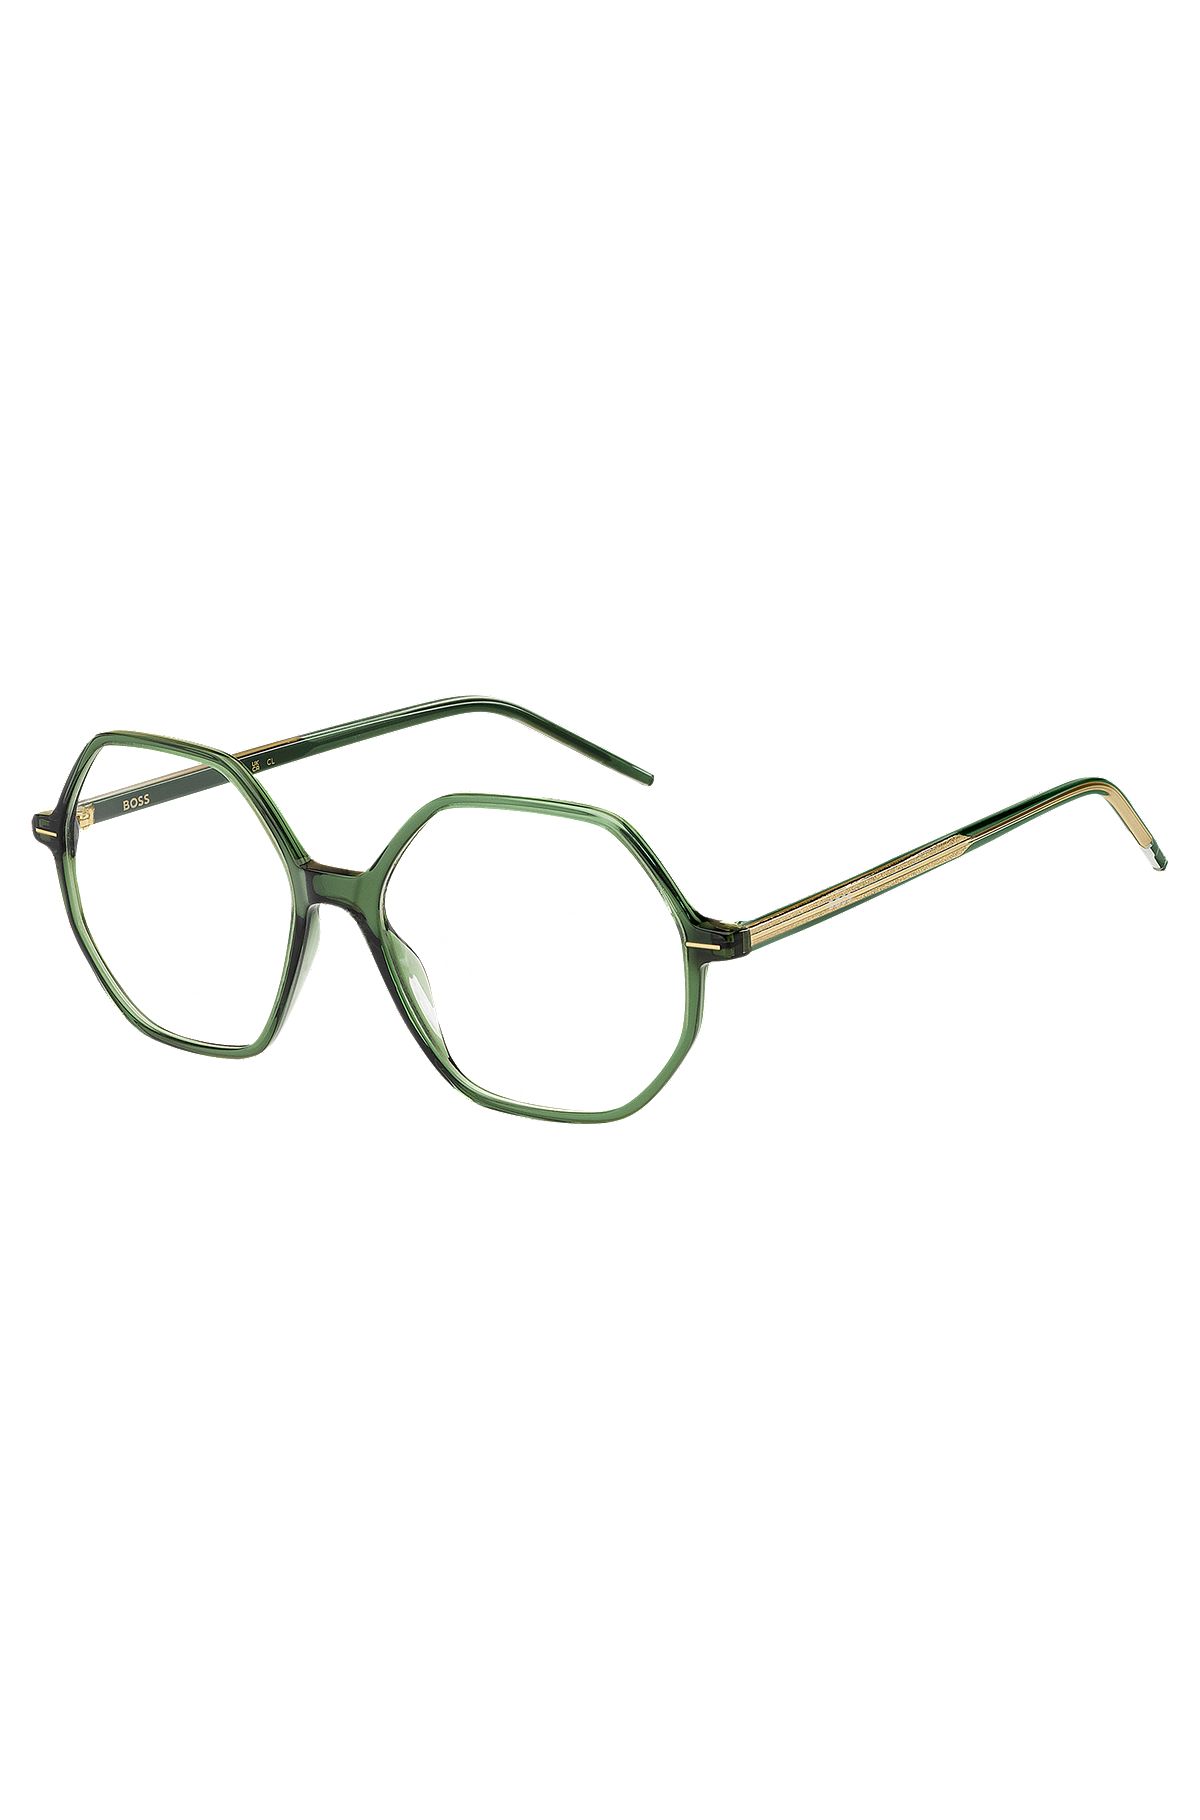 Green-acetate optical frames with striped metal core wire, Dark Green